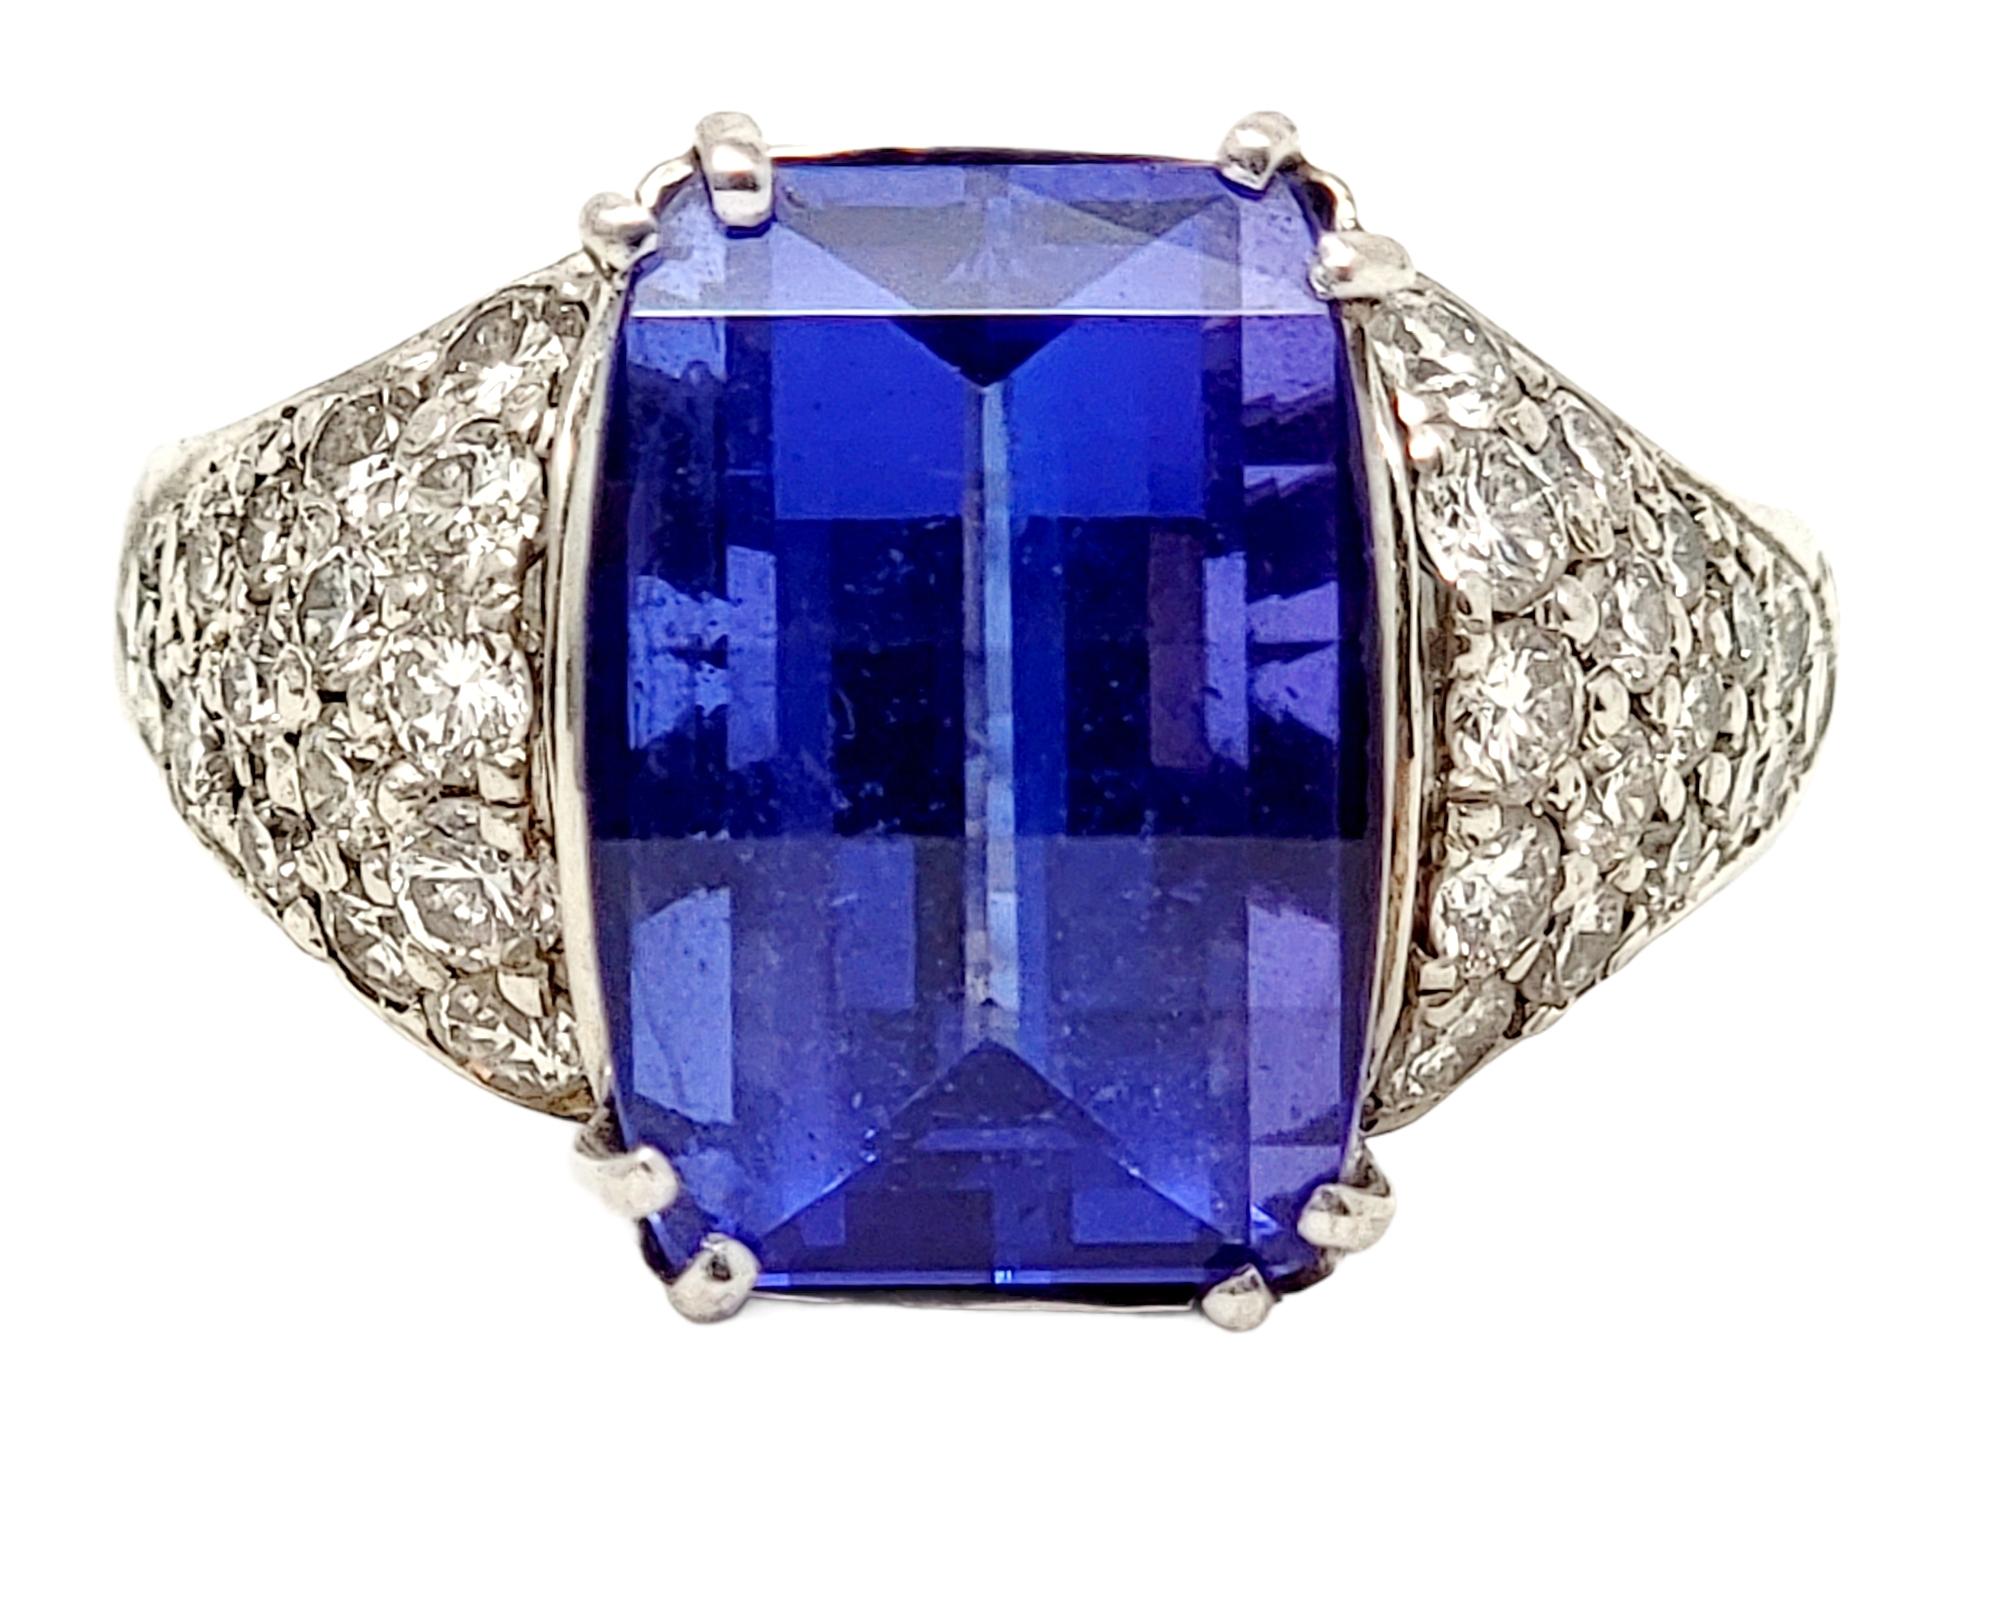 Ring size: 10

Absolutely magnificent tanzanite and diamond ring. The brilliant blue stone against the bright white diamonds really catches the viewers eye while the sizeable stone fills the finger with sparkle. The impressive 7.50 carat prong set